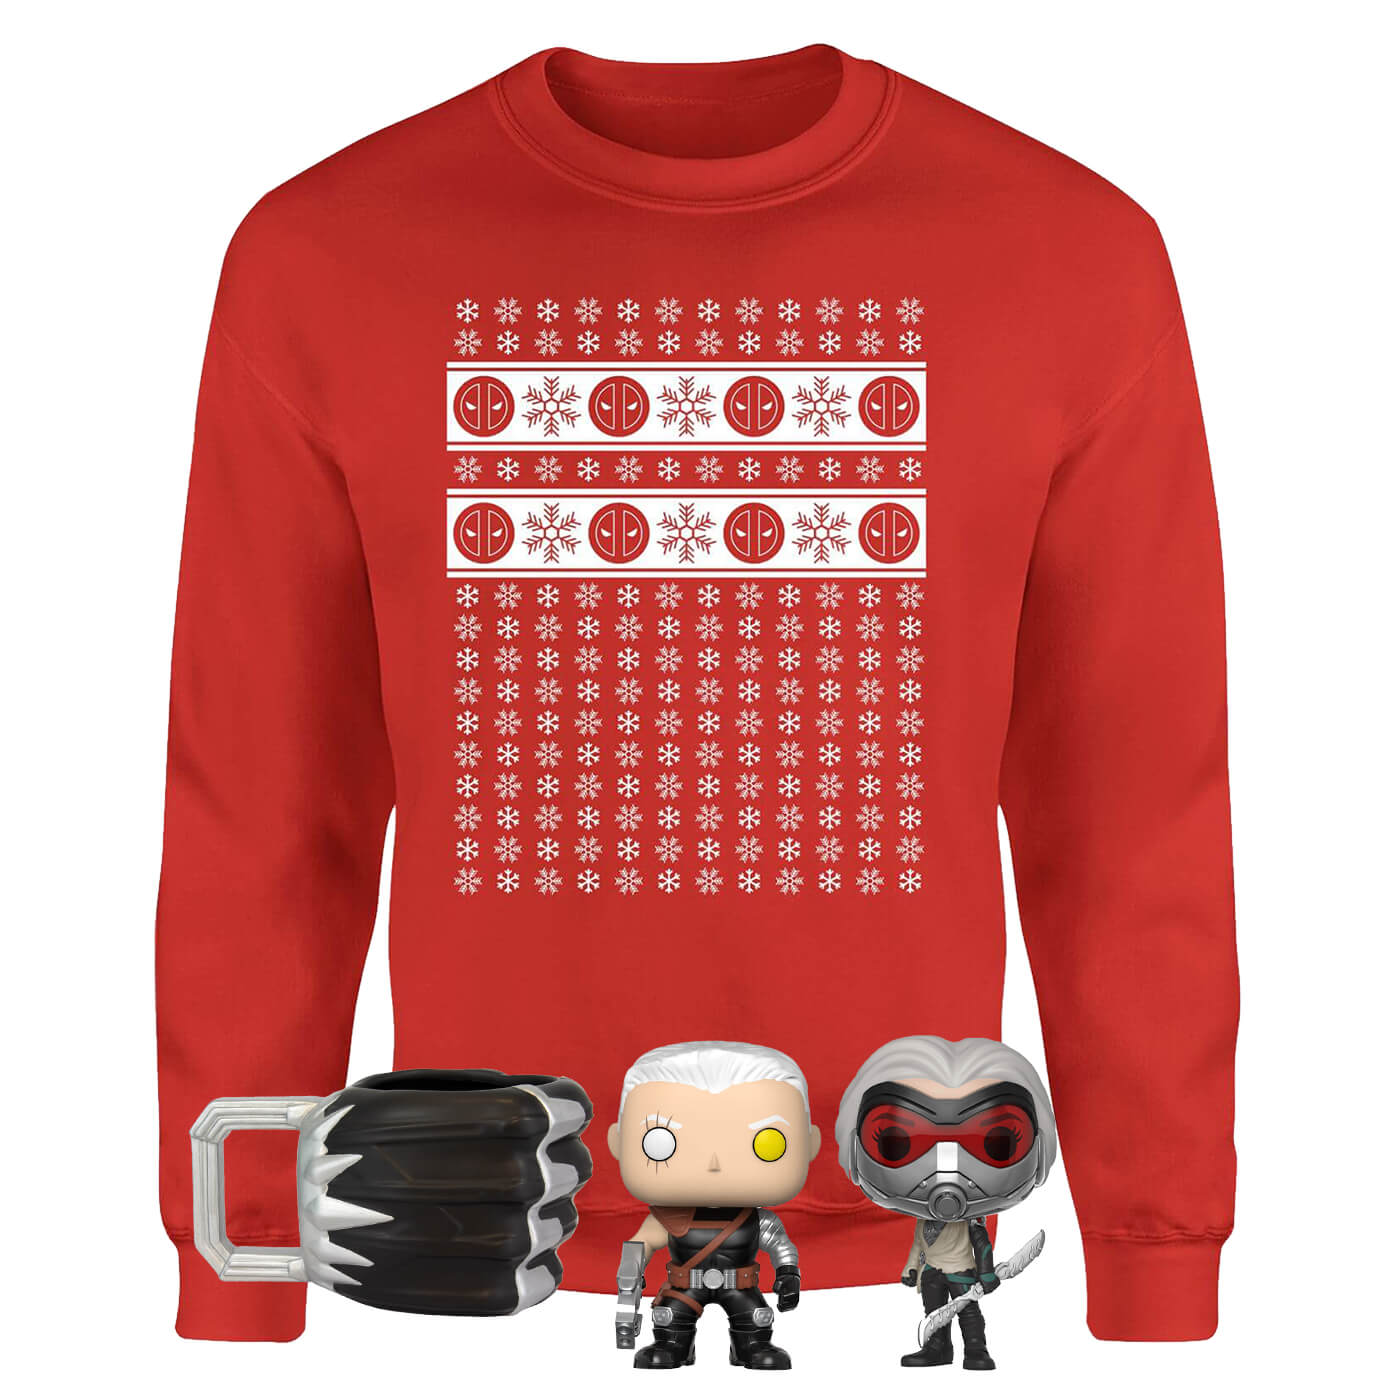 Marvel Officially Licensed MEGA Christmas Gift Set - Includes Christmas Sweatshirt plus 3 gifts - L